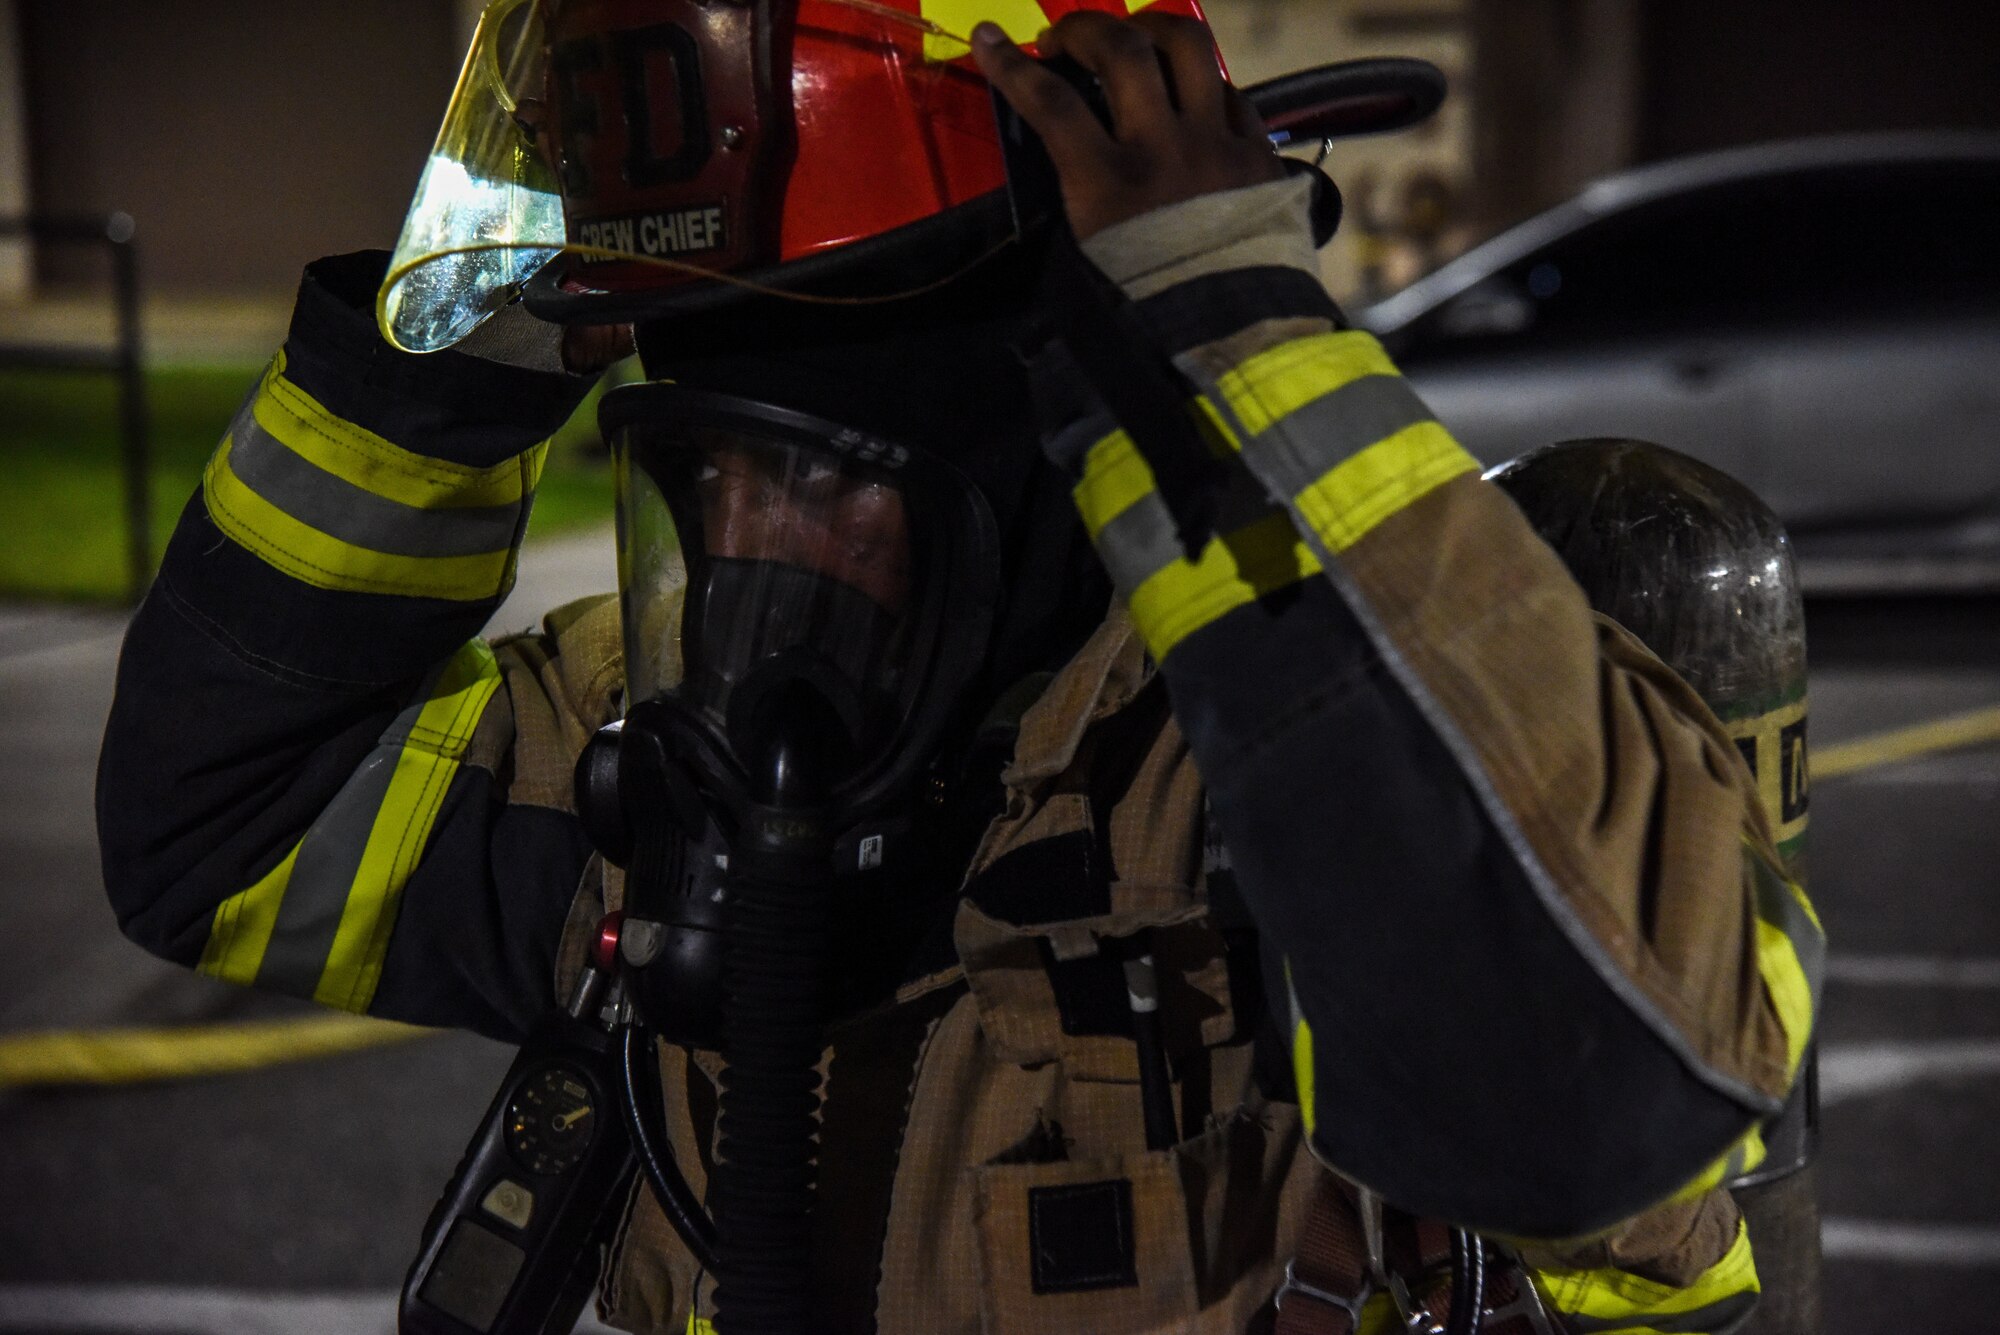 Staff Sgt. Tyler McFarland, 51st Civil Engineer Squadron firefighter, dons his fire protection equipment during a training event